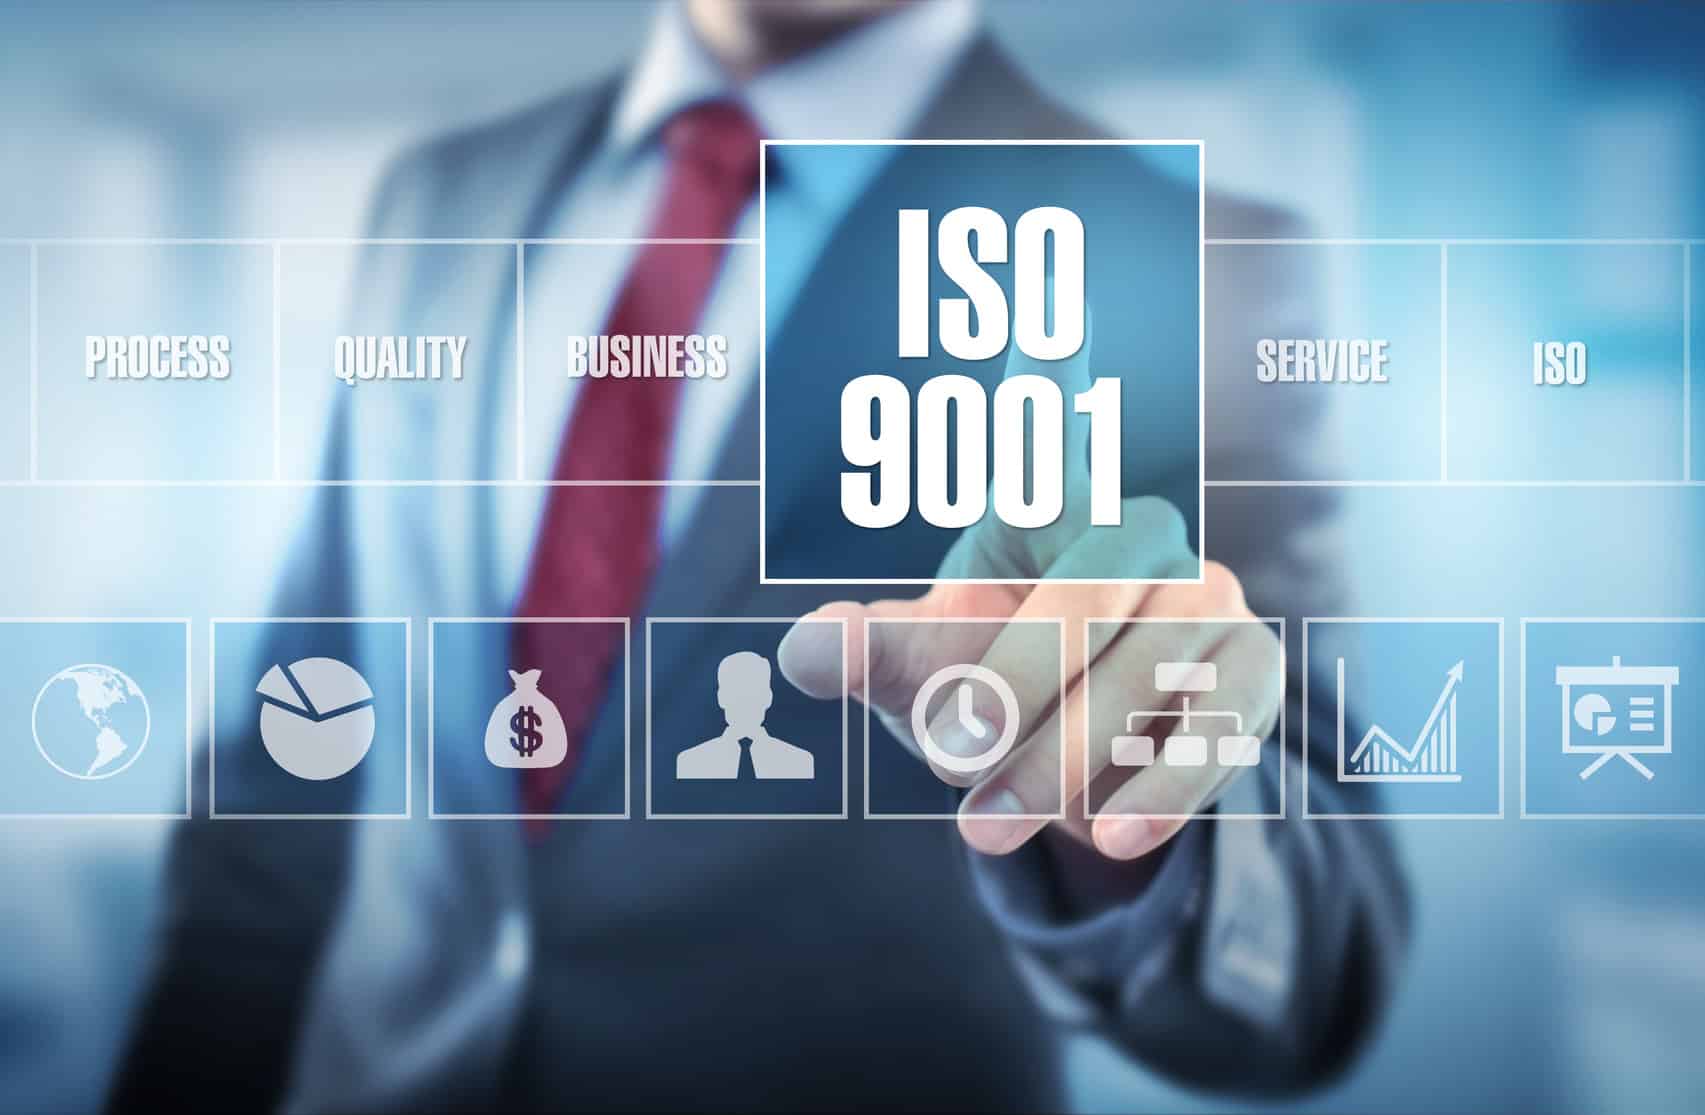 How to Implement ISO 9001?